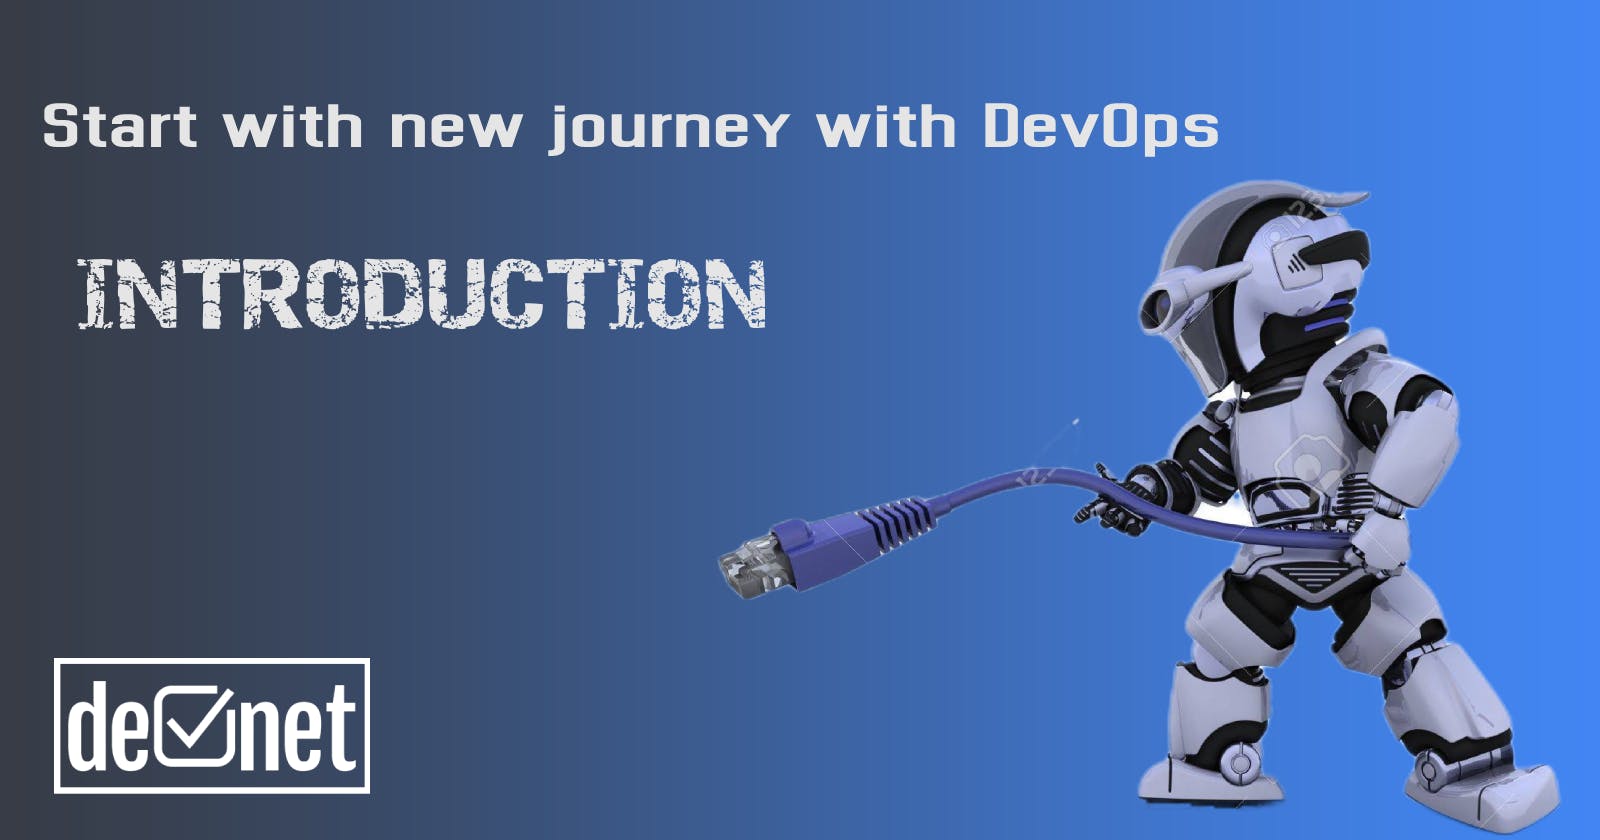 Start with new journey with DevOps